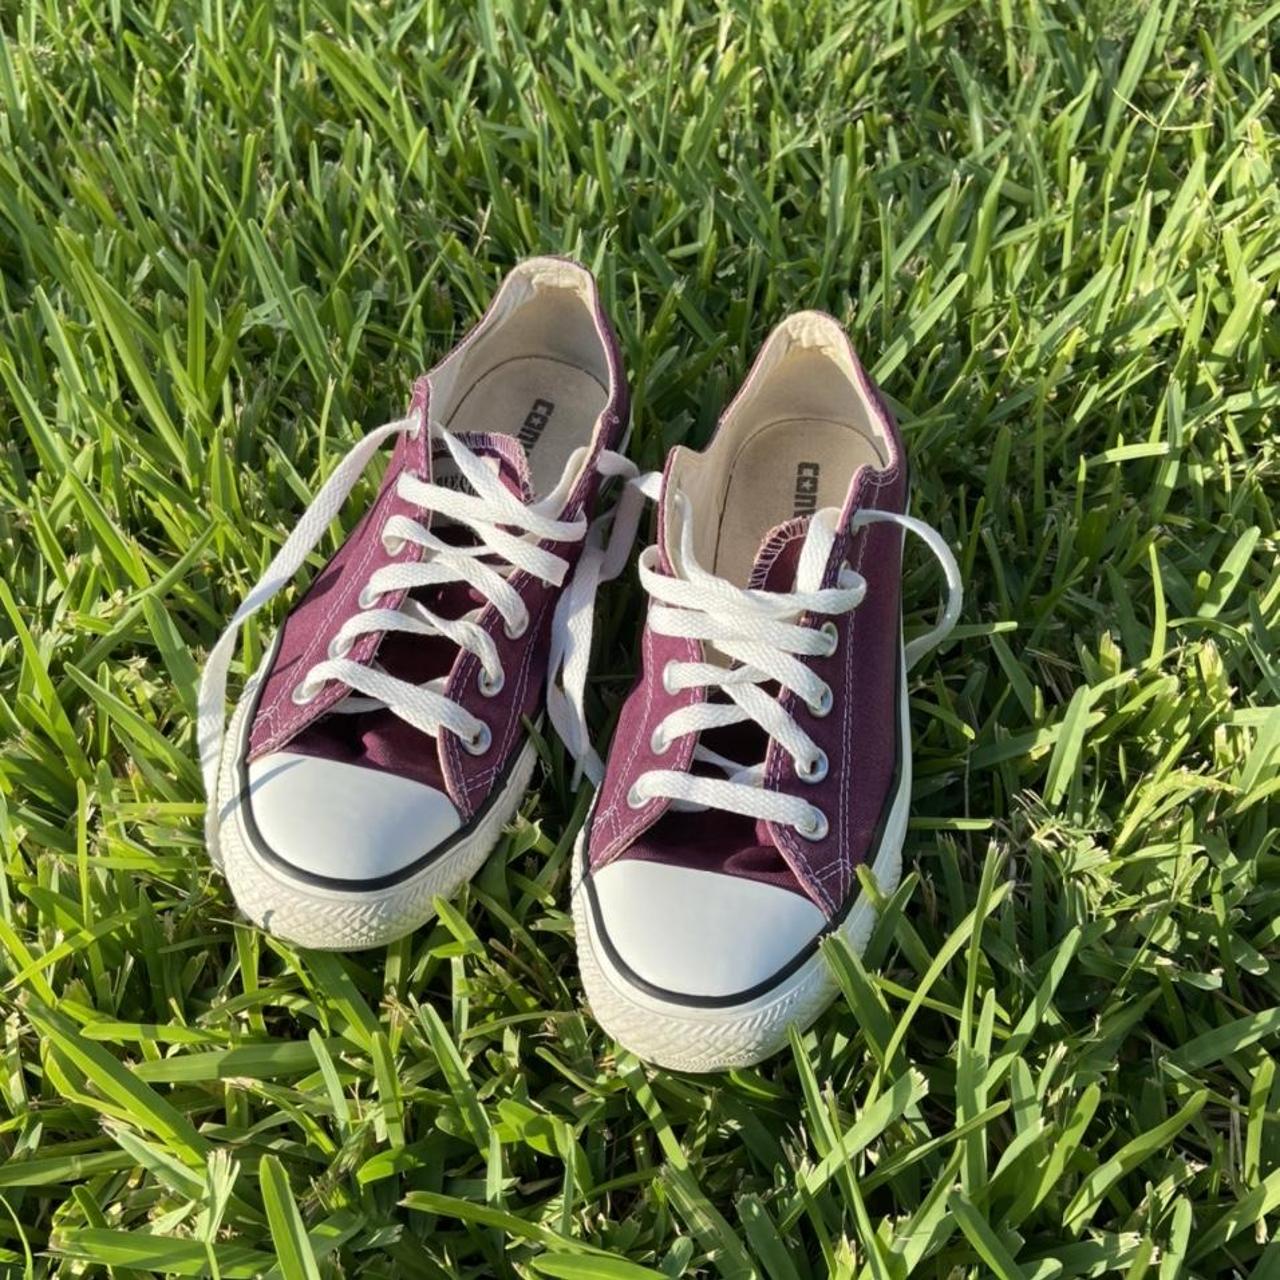 Classic Converse All Star maroon used but in good photo